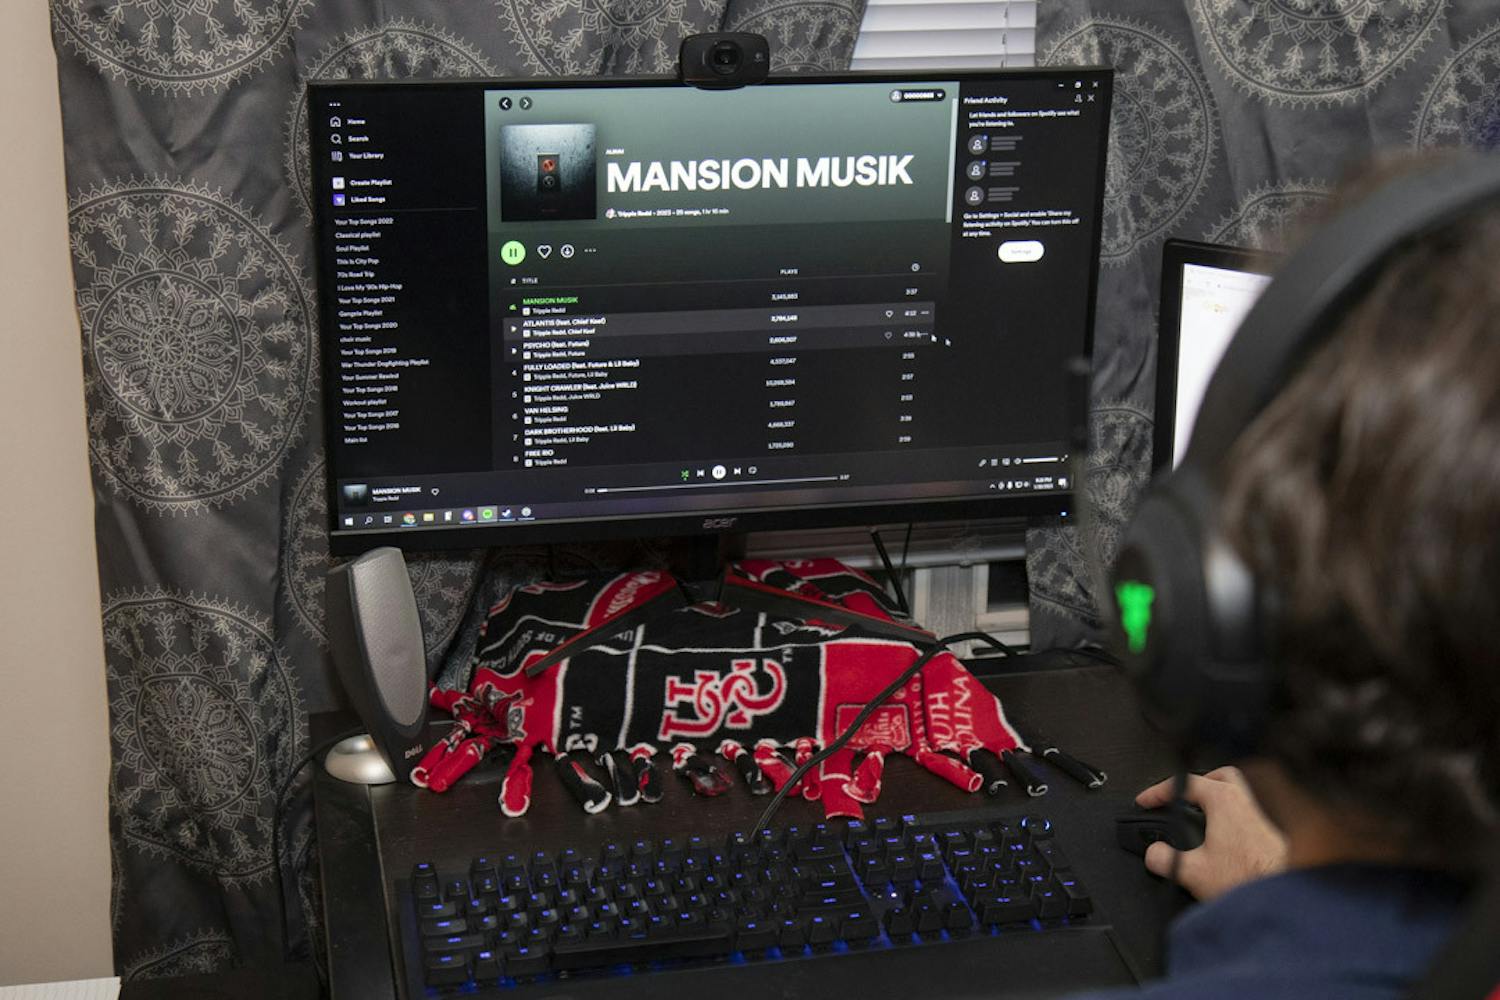 Fourth-year finance ɫɫƵ Beck Stephenson listens to Trippie Redd's new album "Mansion Musik" on Jan 30, 2022. The new, 25-song album features lyrics from the late Juice WRLD and appearances from Lil Baby, Travis Scott, Future and other popular names in rap.